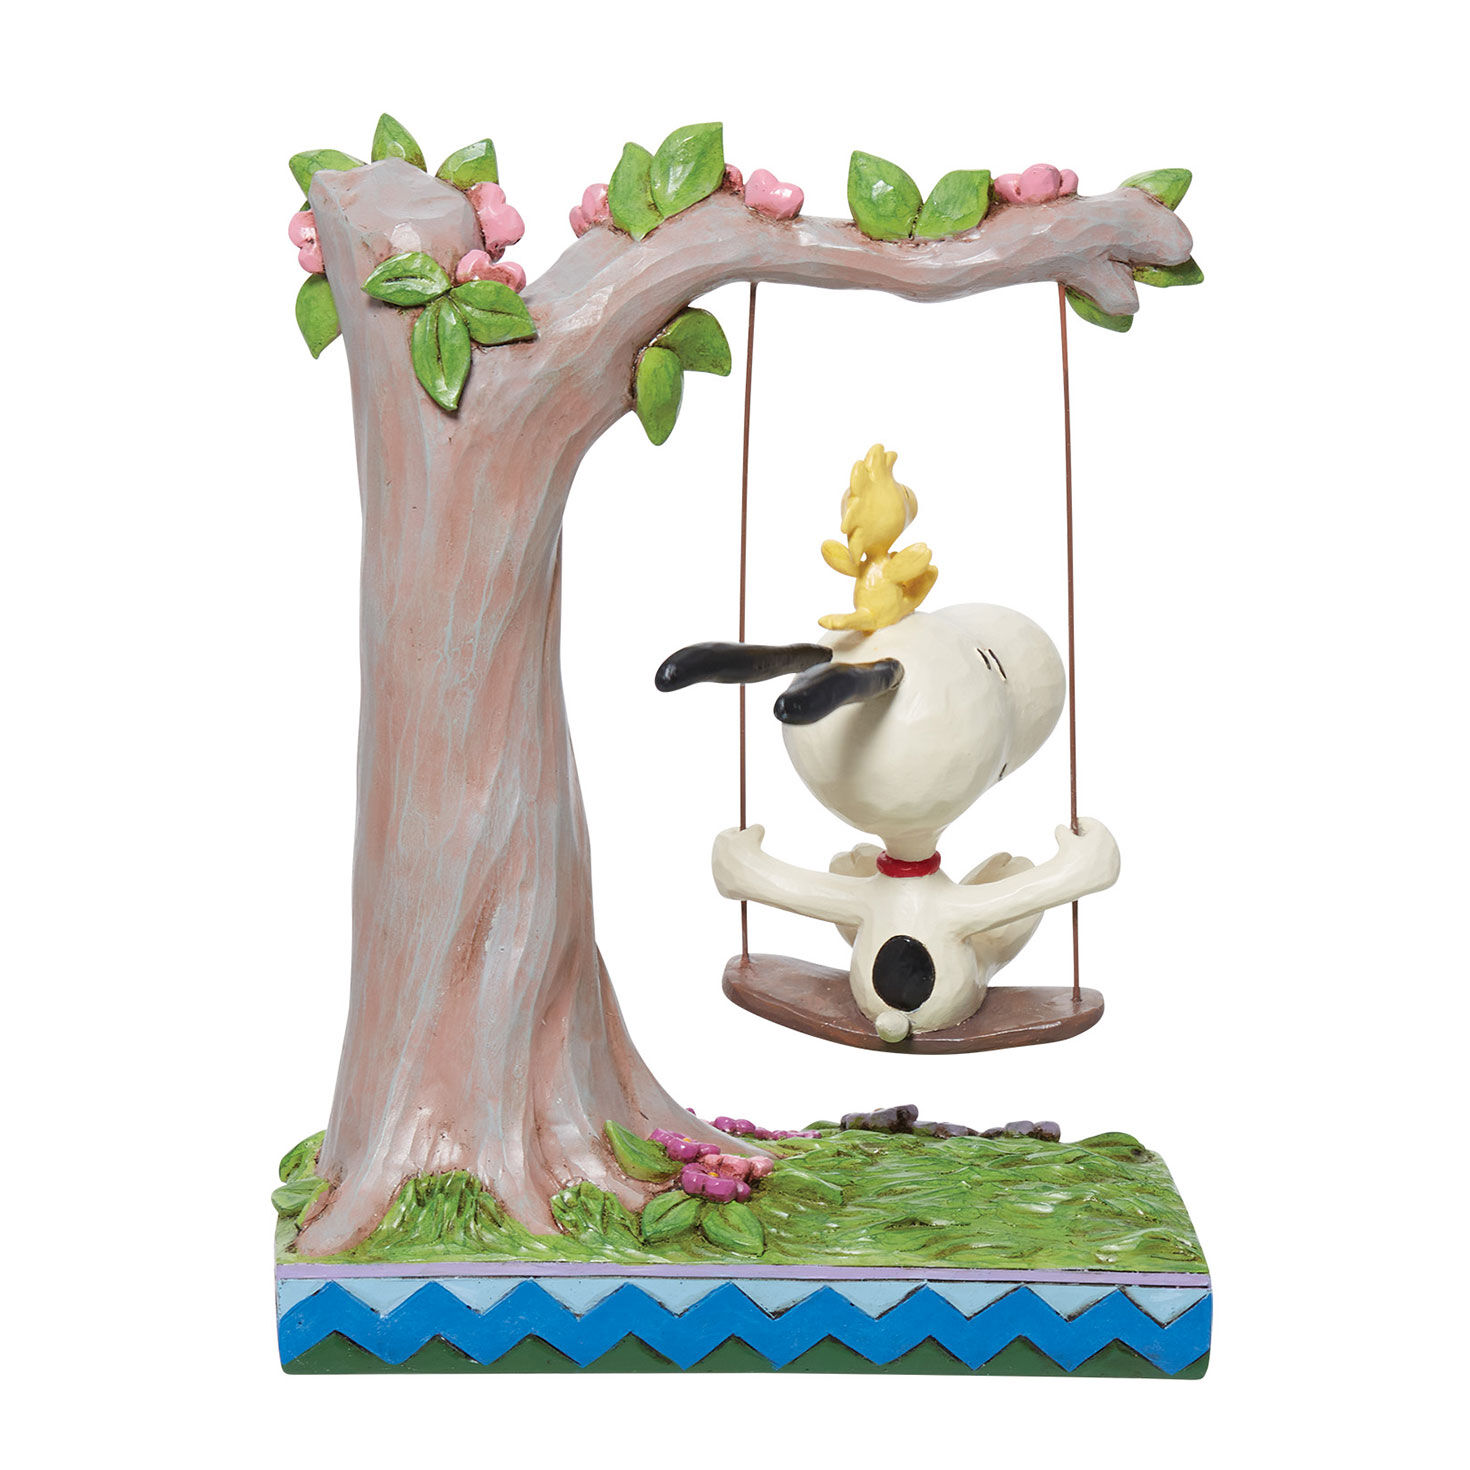 Jim Shore Peanuts Snoopy and Woodstock in Swing Figurine, 8" for only USD 74.99 | Hallmark